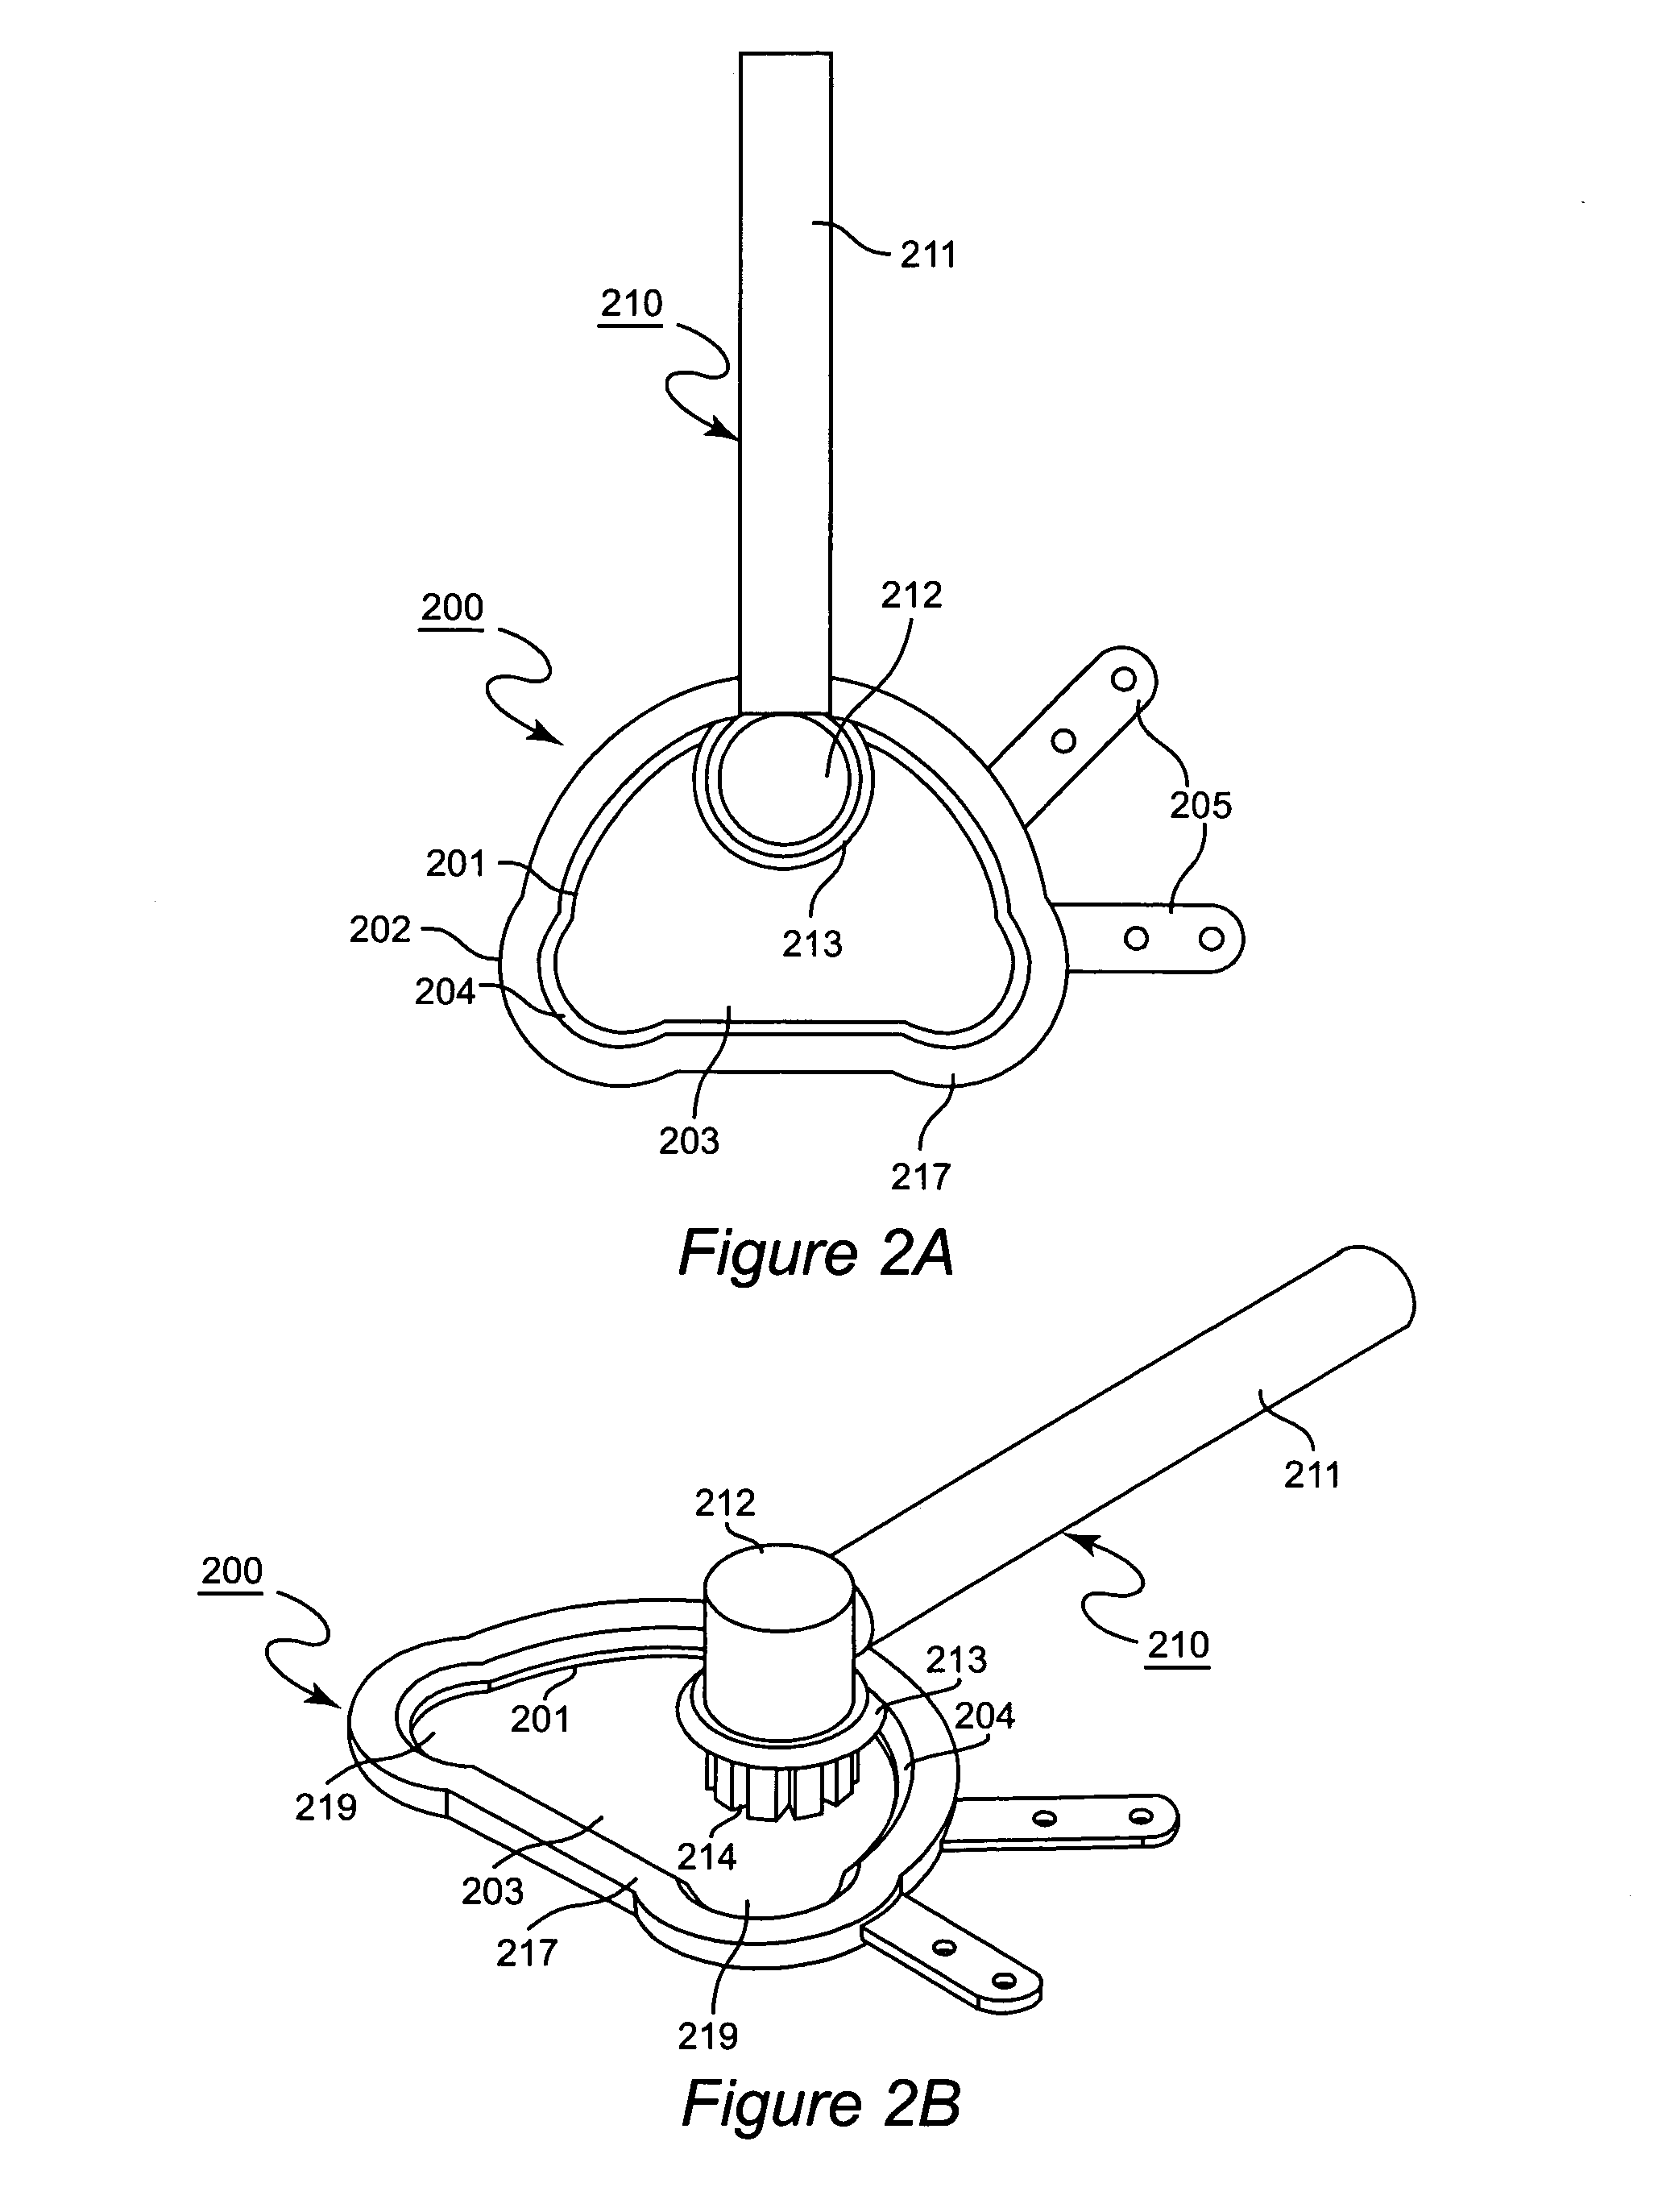 Bone mill and template